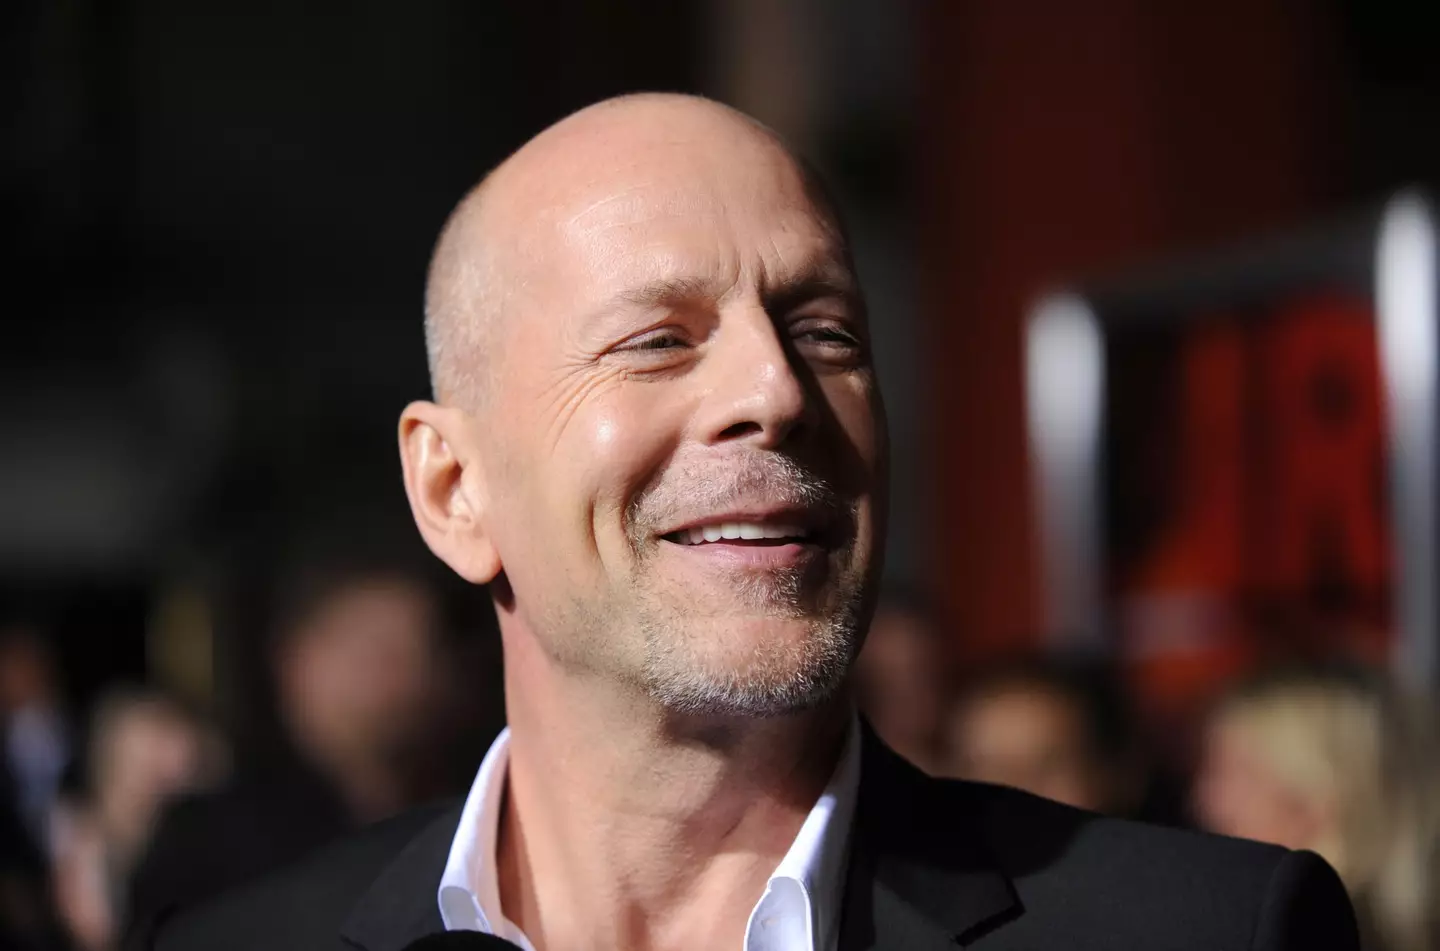 Earlier this year, Bruce Willis announced he’d be ‘stepping away’ from acting following an aphasia diagnosis.